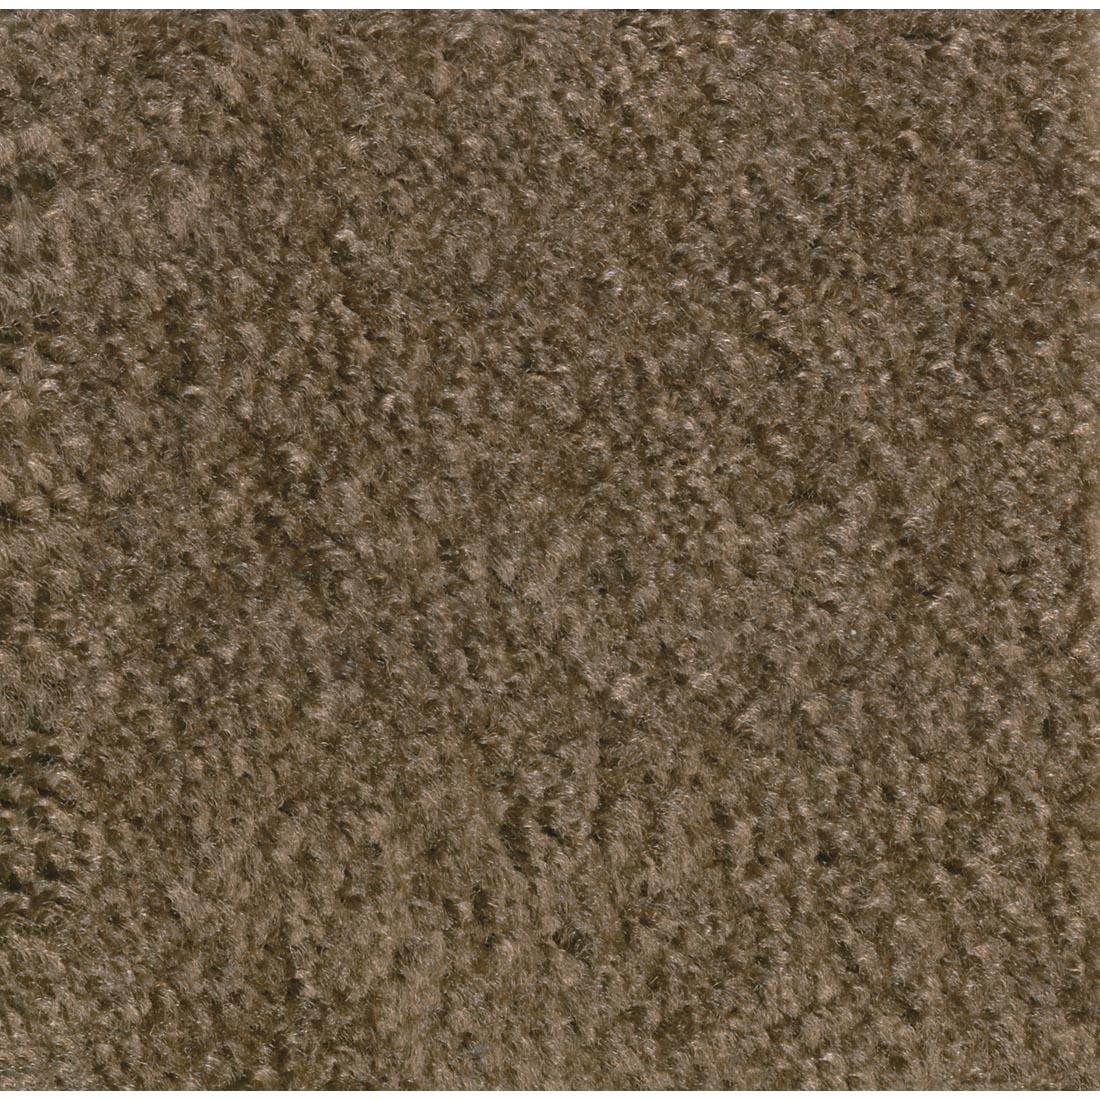 Mocha-colored carpet swatch from the Rectangle Rug by Carpets For Kids